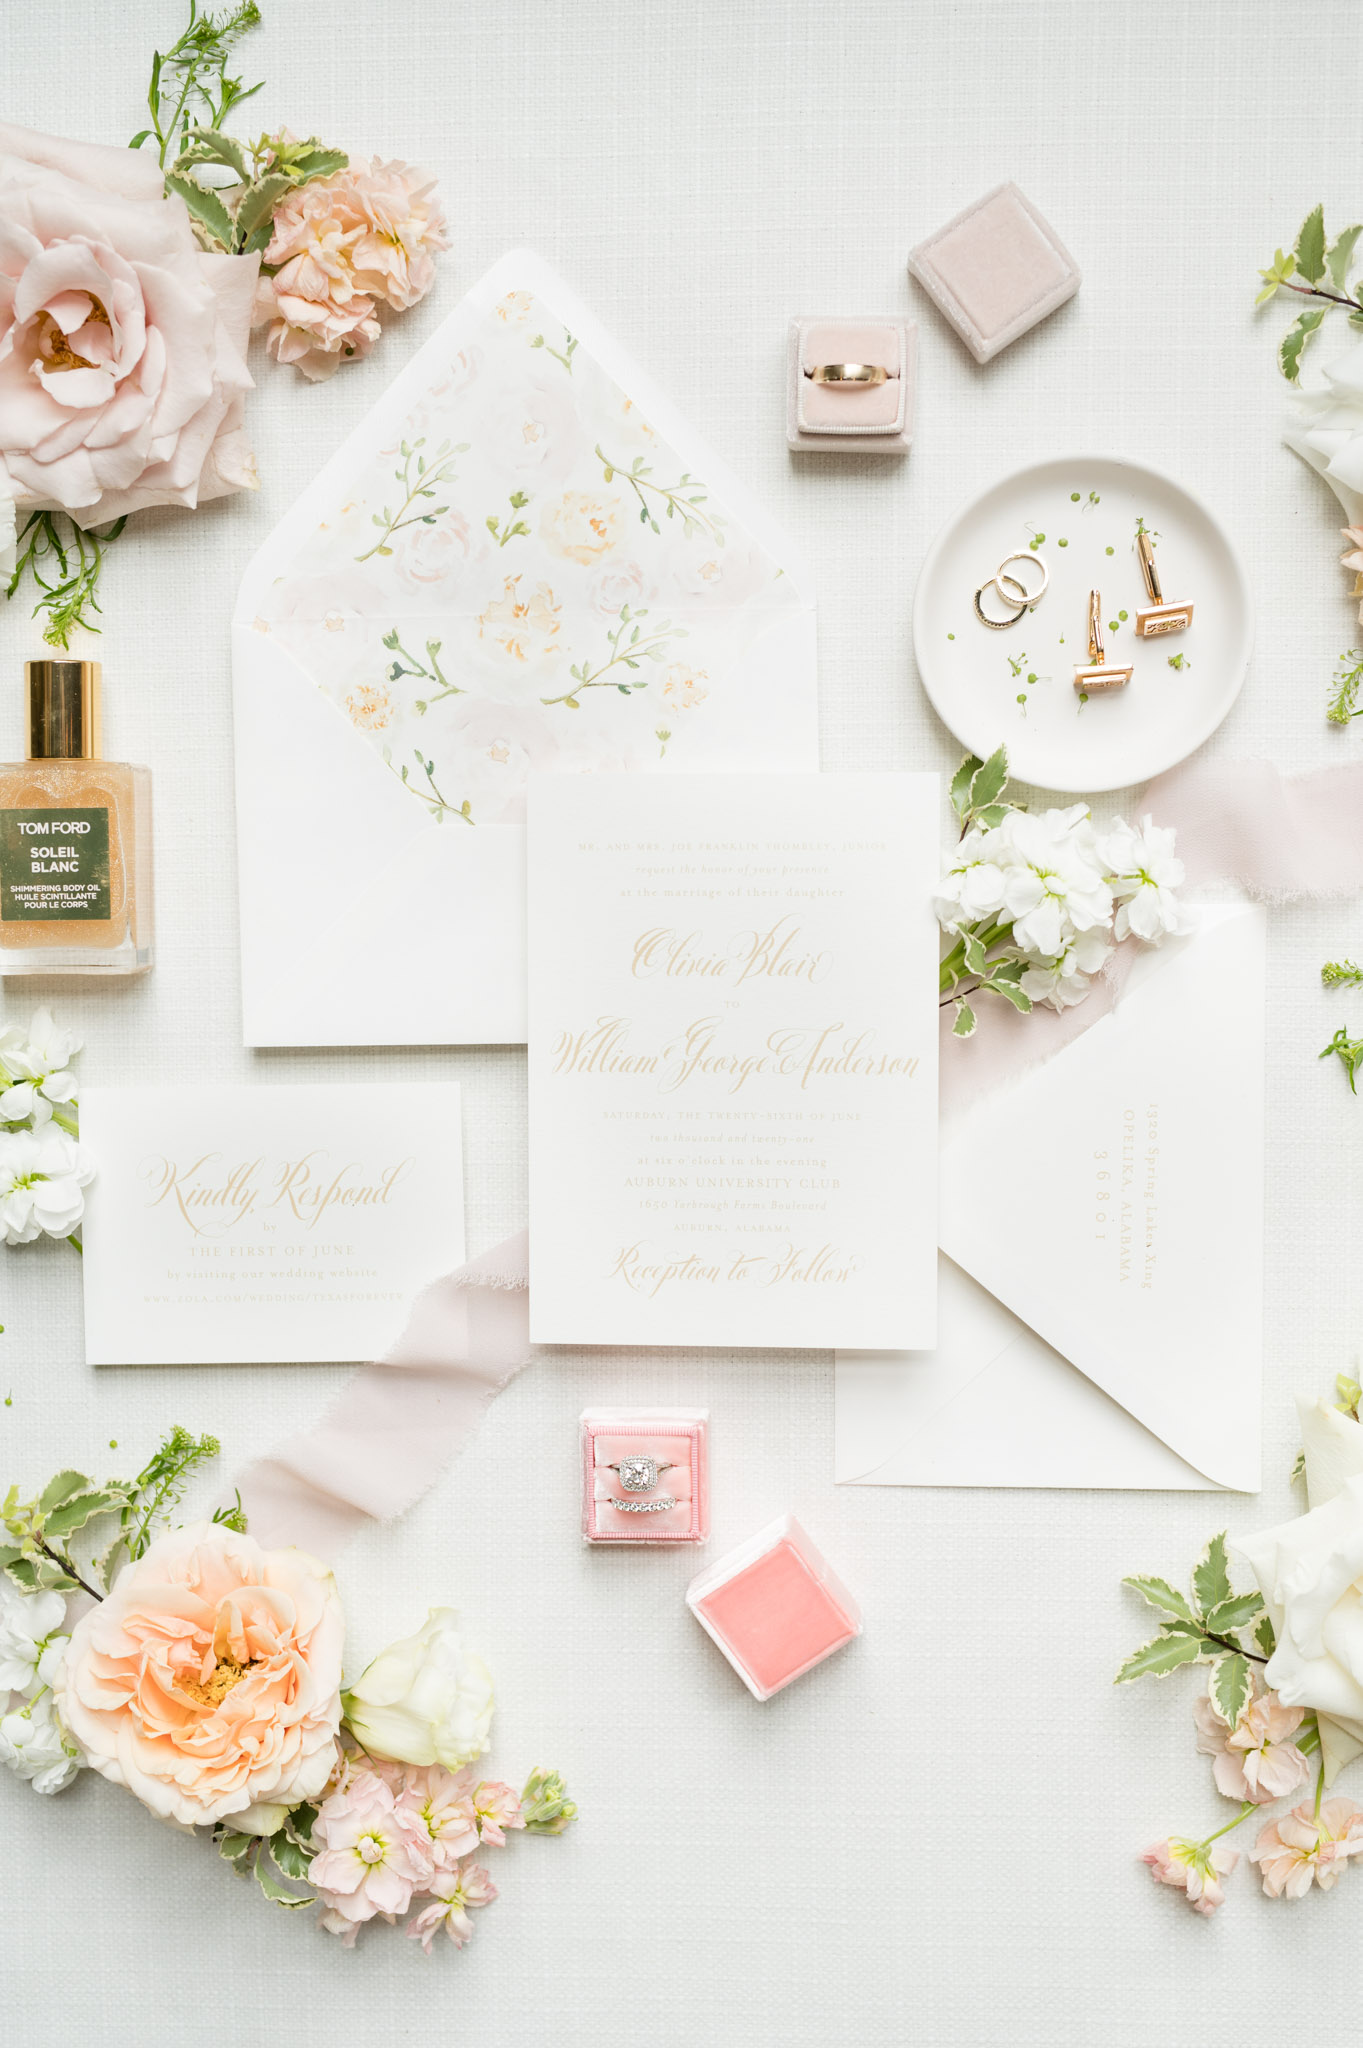 Multi-piece invitation suite sits with flowers and details.